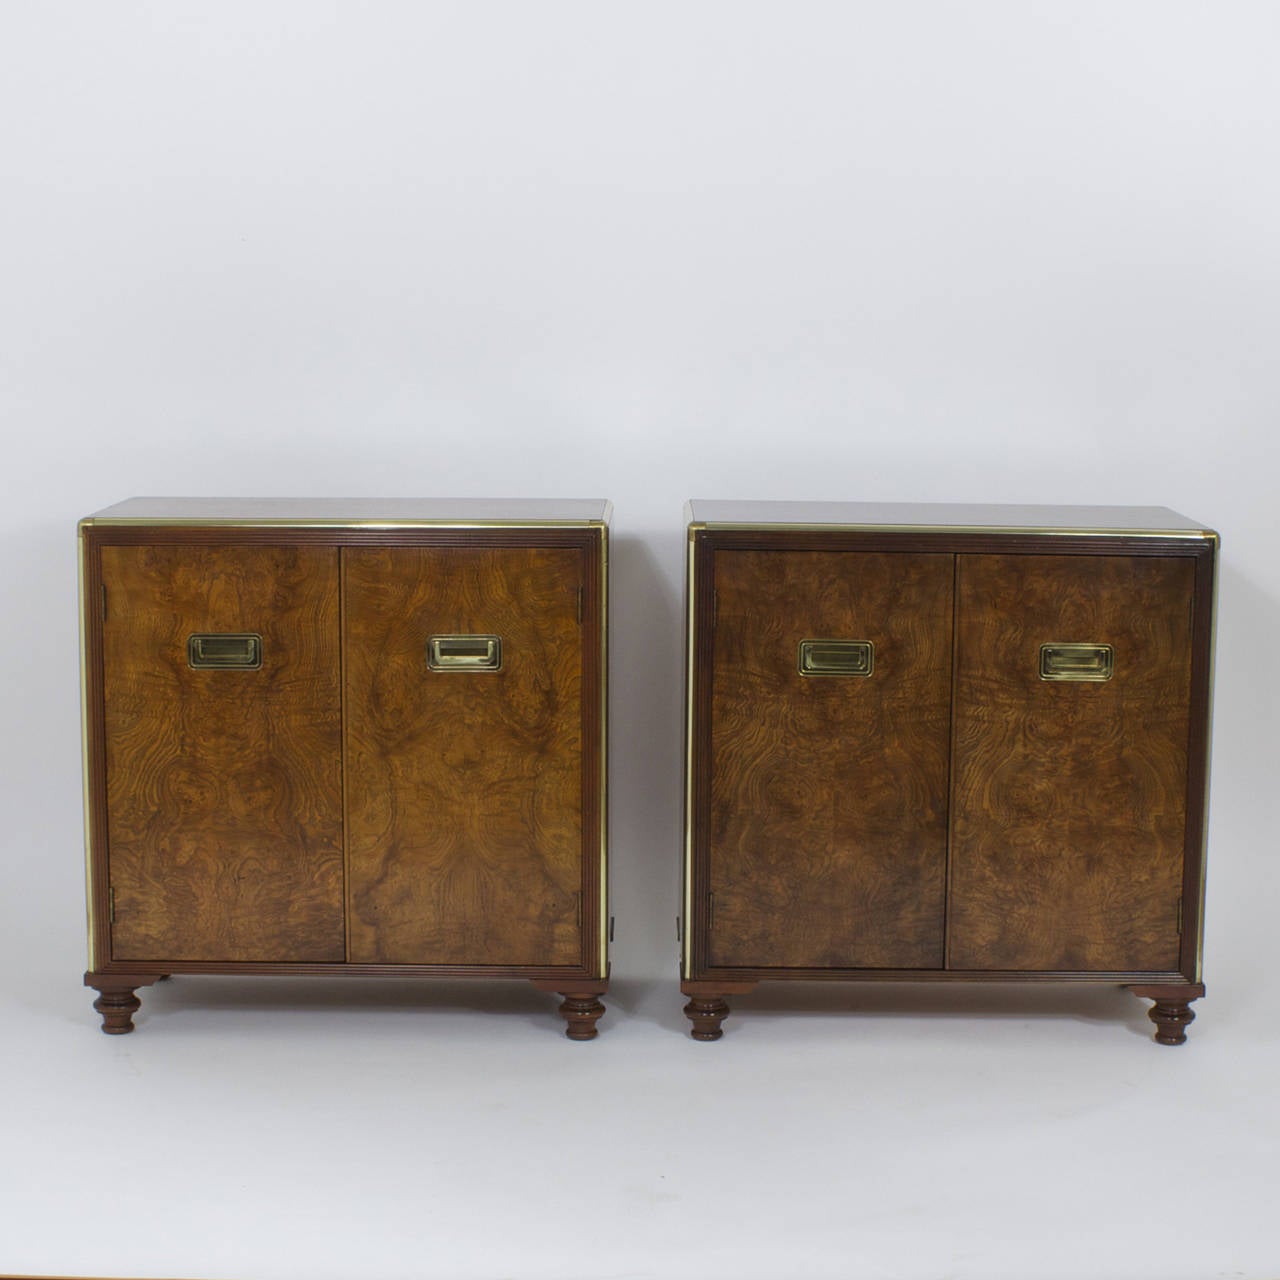 Pair of handsome, burled wood, cabinets, nightstands, chests or beside tables. Featuring campaign style brass hardware, turned feet and glass shelves behind 2 doors. Possibly by Baker. Perfect as bedside tables, or as end tables in the living room. 